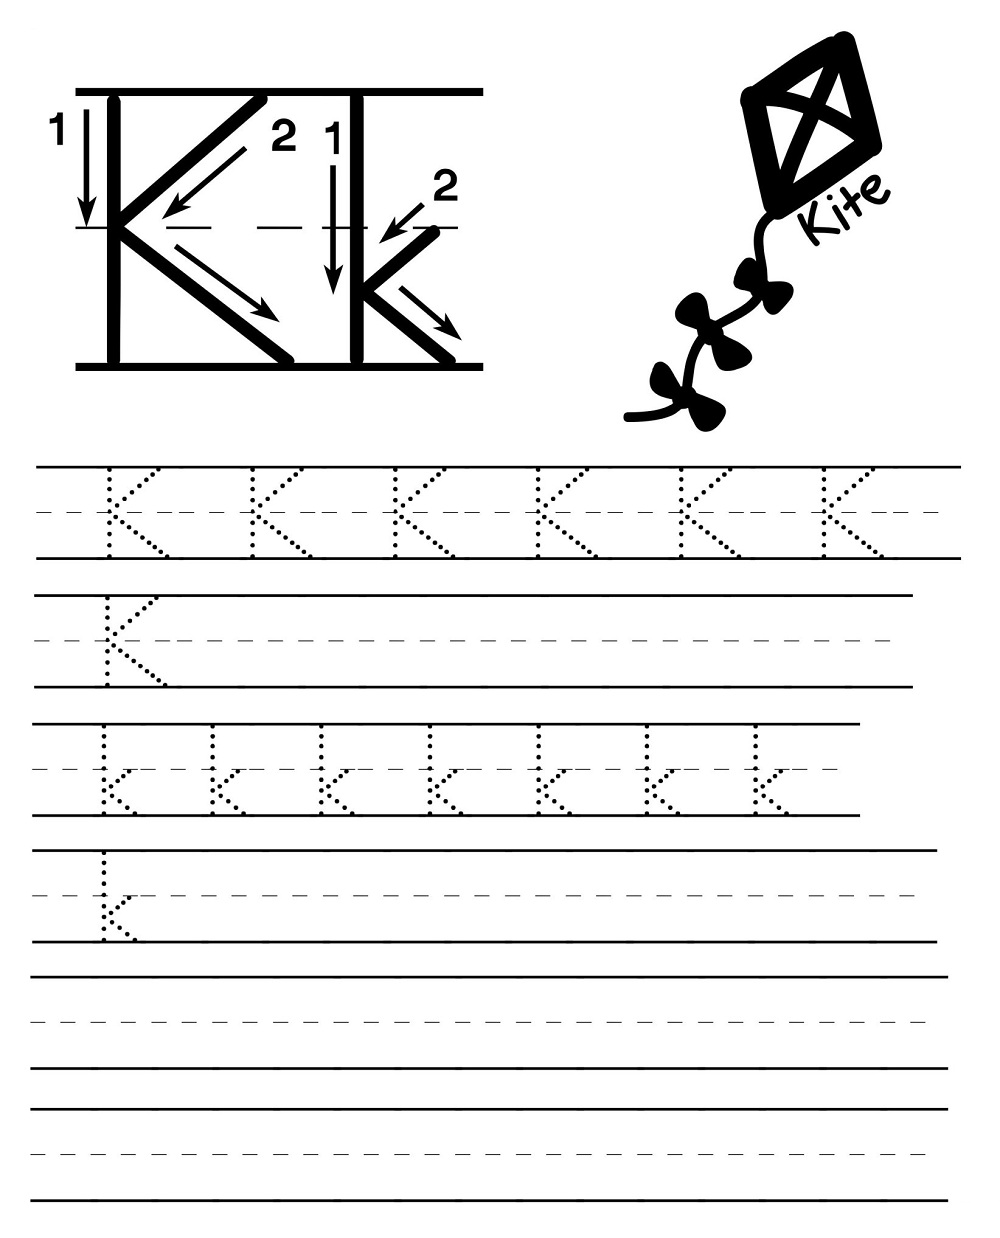 Letter Tracing K